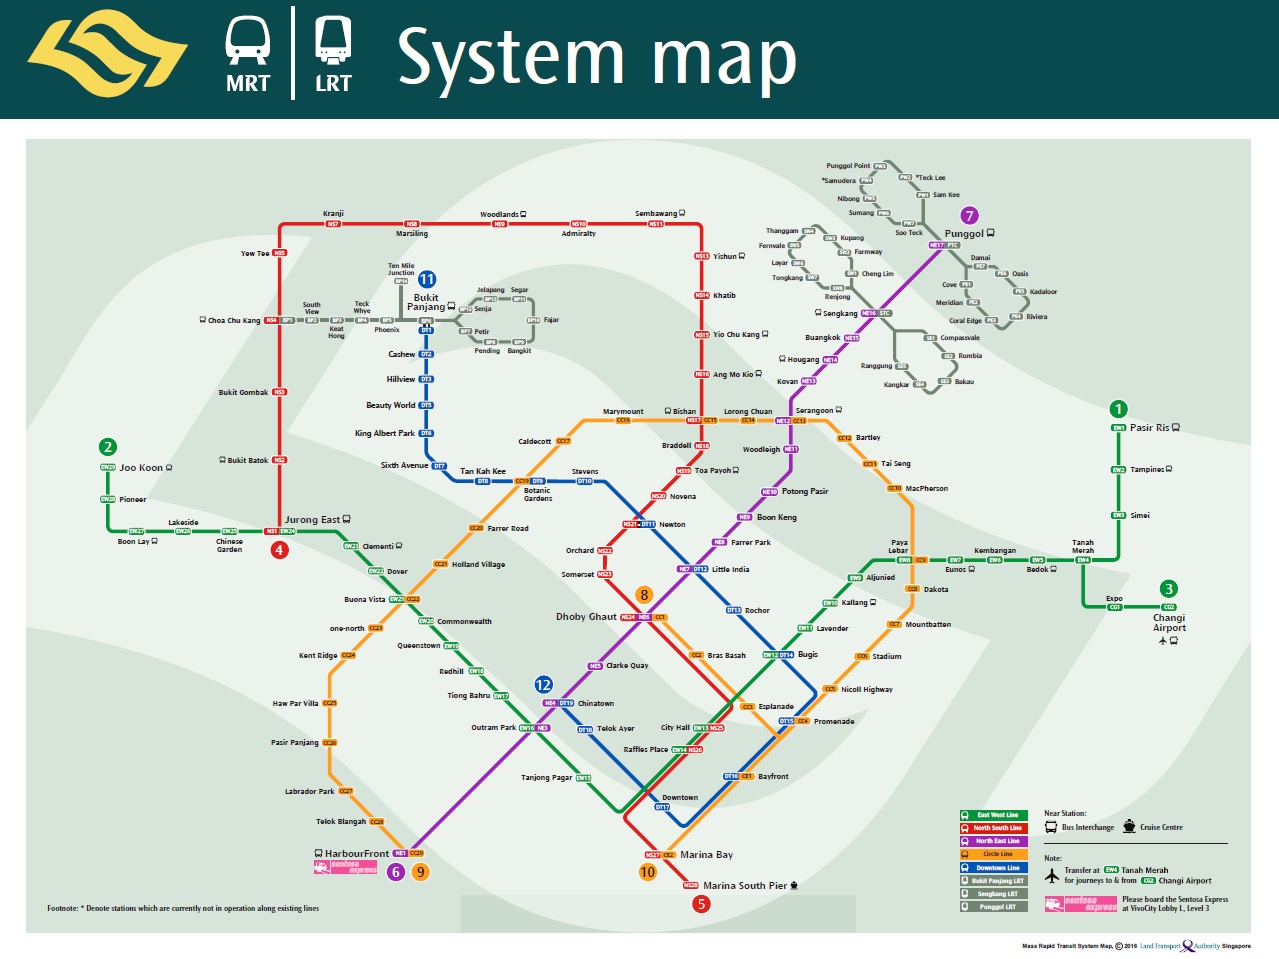 System map of Singapore's efficient and reaonably priced LRT and MRT system